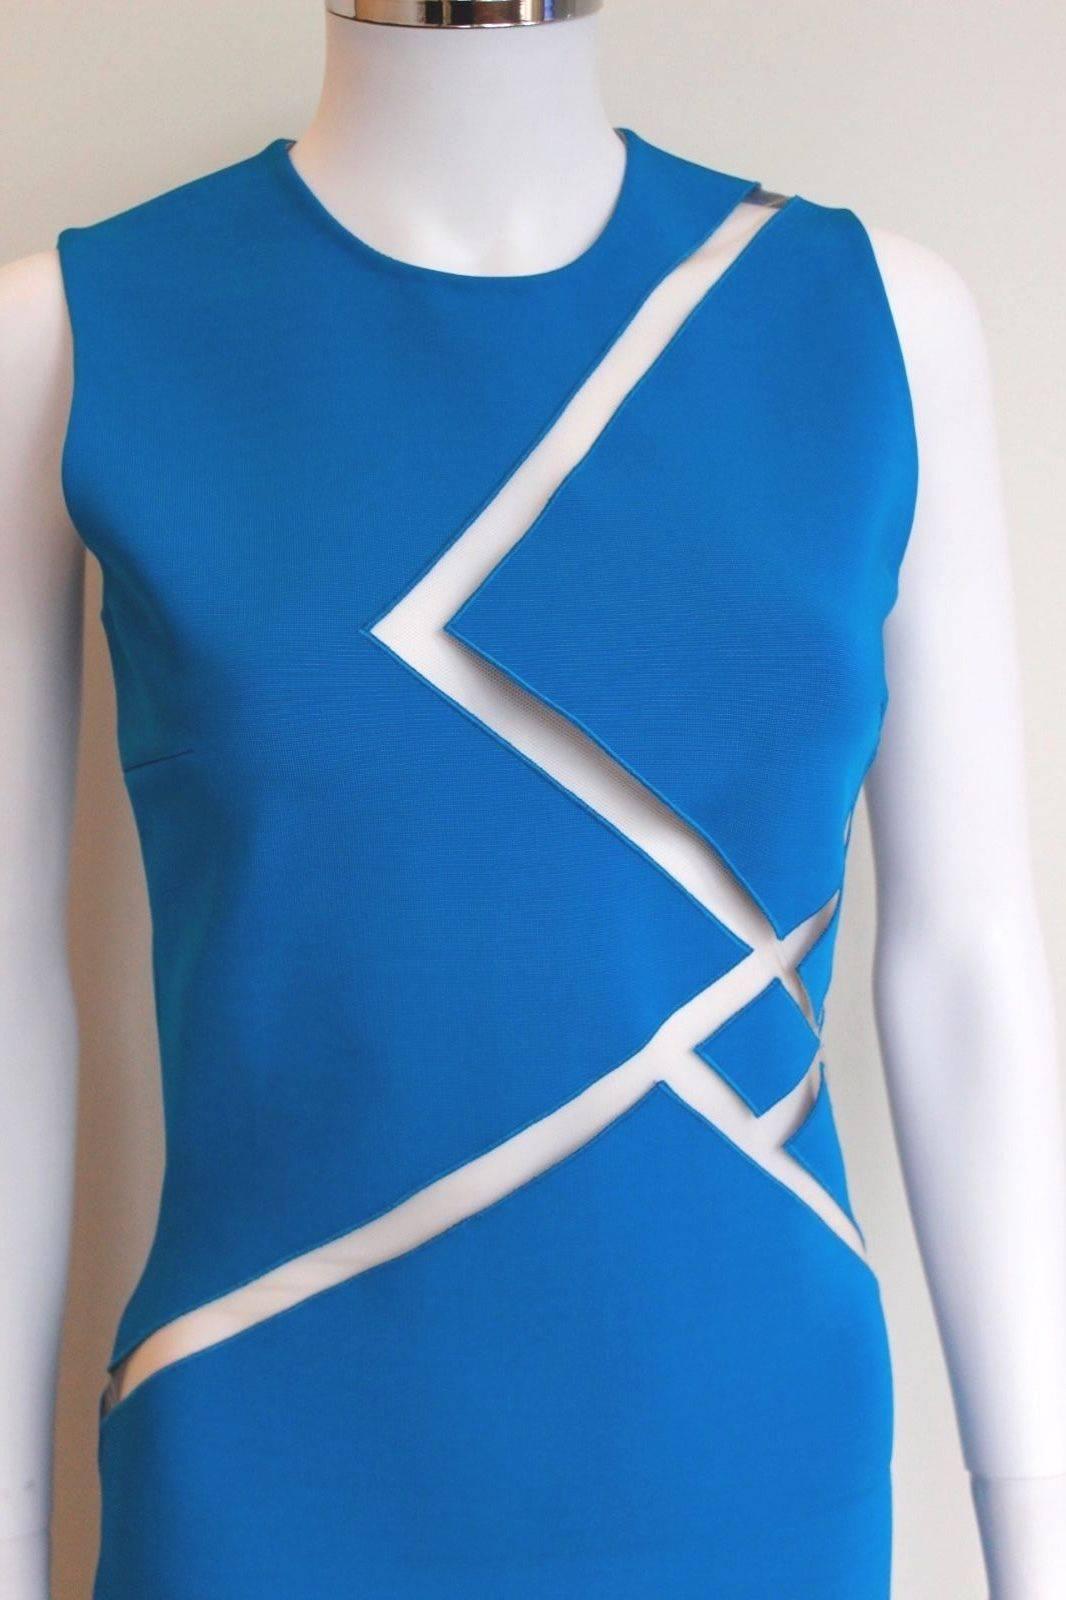 New David Koma Blue Mesh Insert Cut Out Dress uk 10 
Statement blue dress from David Koma featuring diagonal mesh cut out to the bodice  
length 44 inches, chest 16 inches, waist 13 inches across, hips 16.5 inches across laid flat 
86%Viscose, 10%